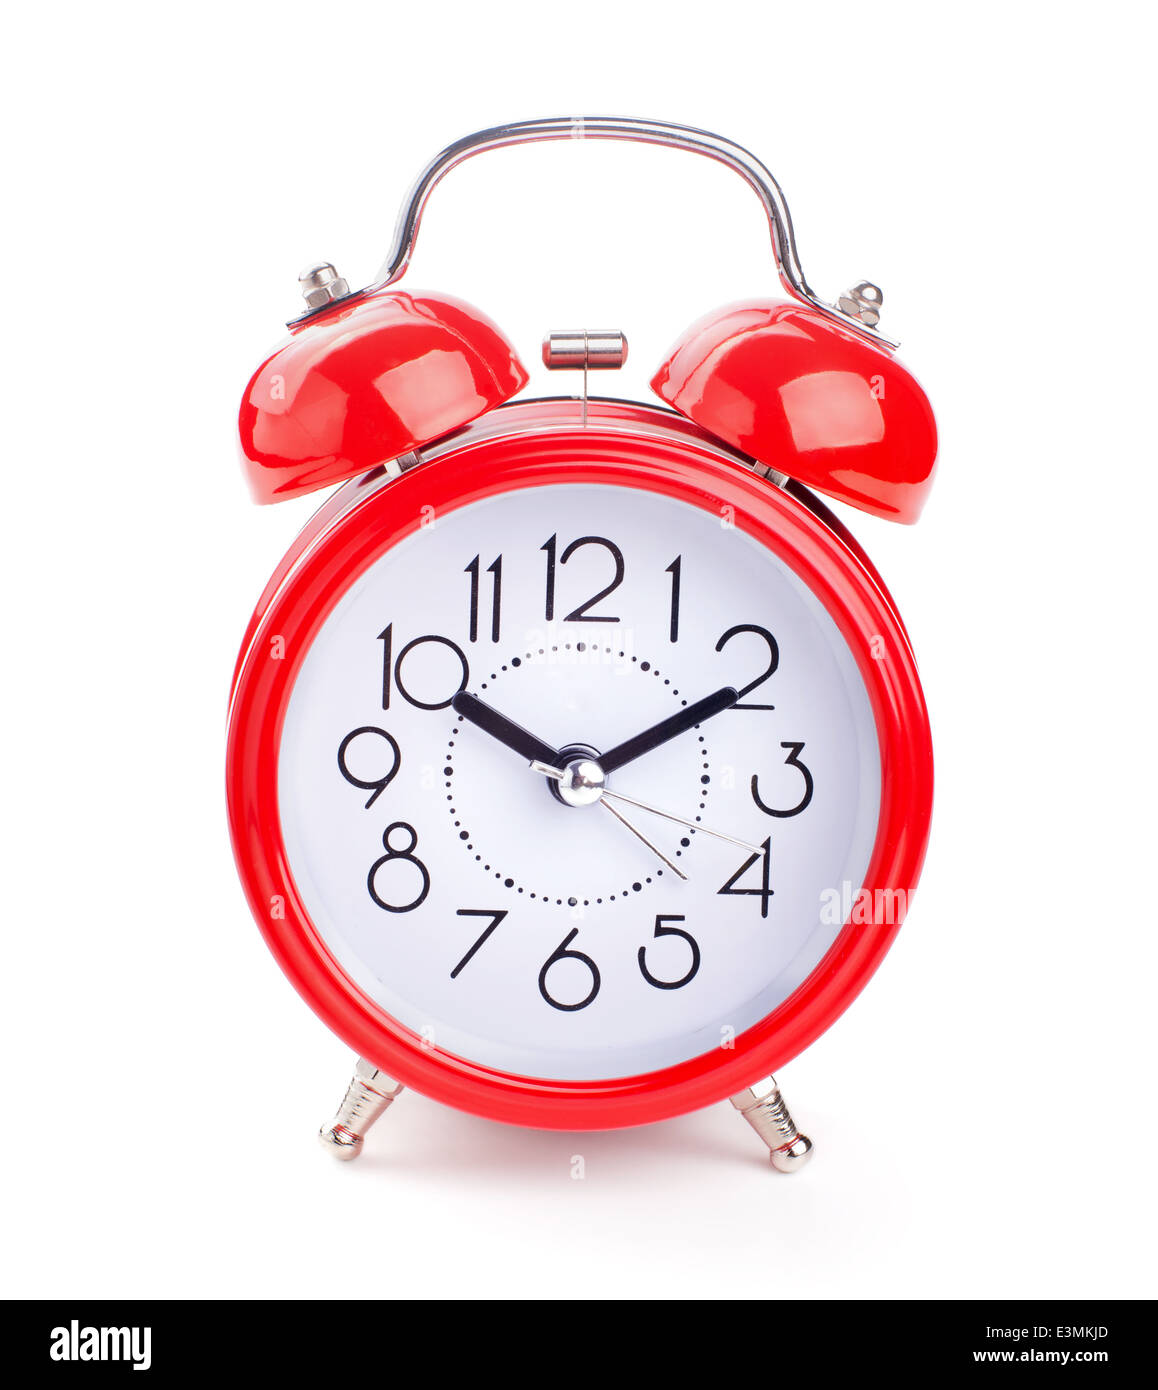 red alarm clock isolated on white background Stock Photo